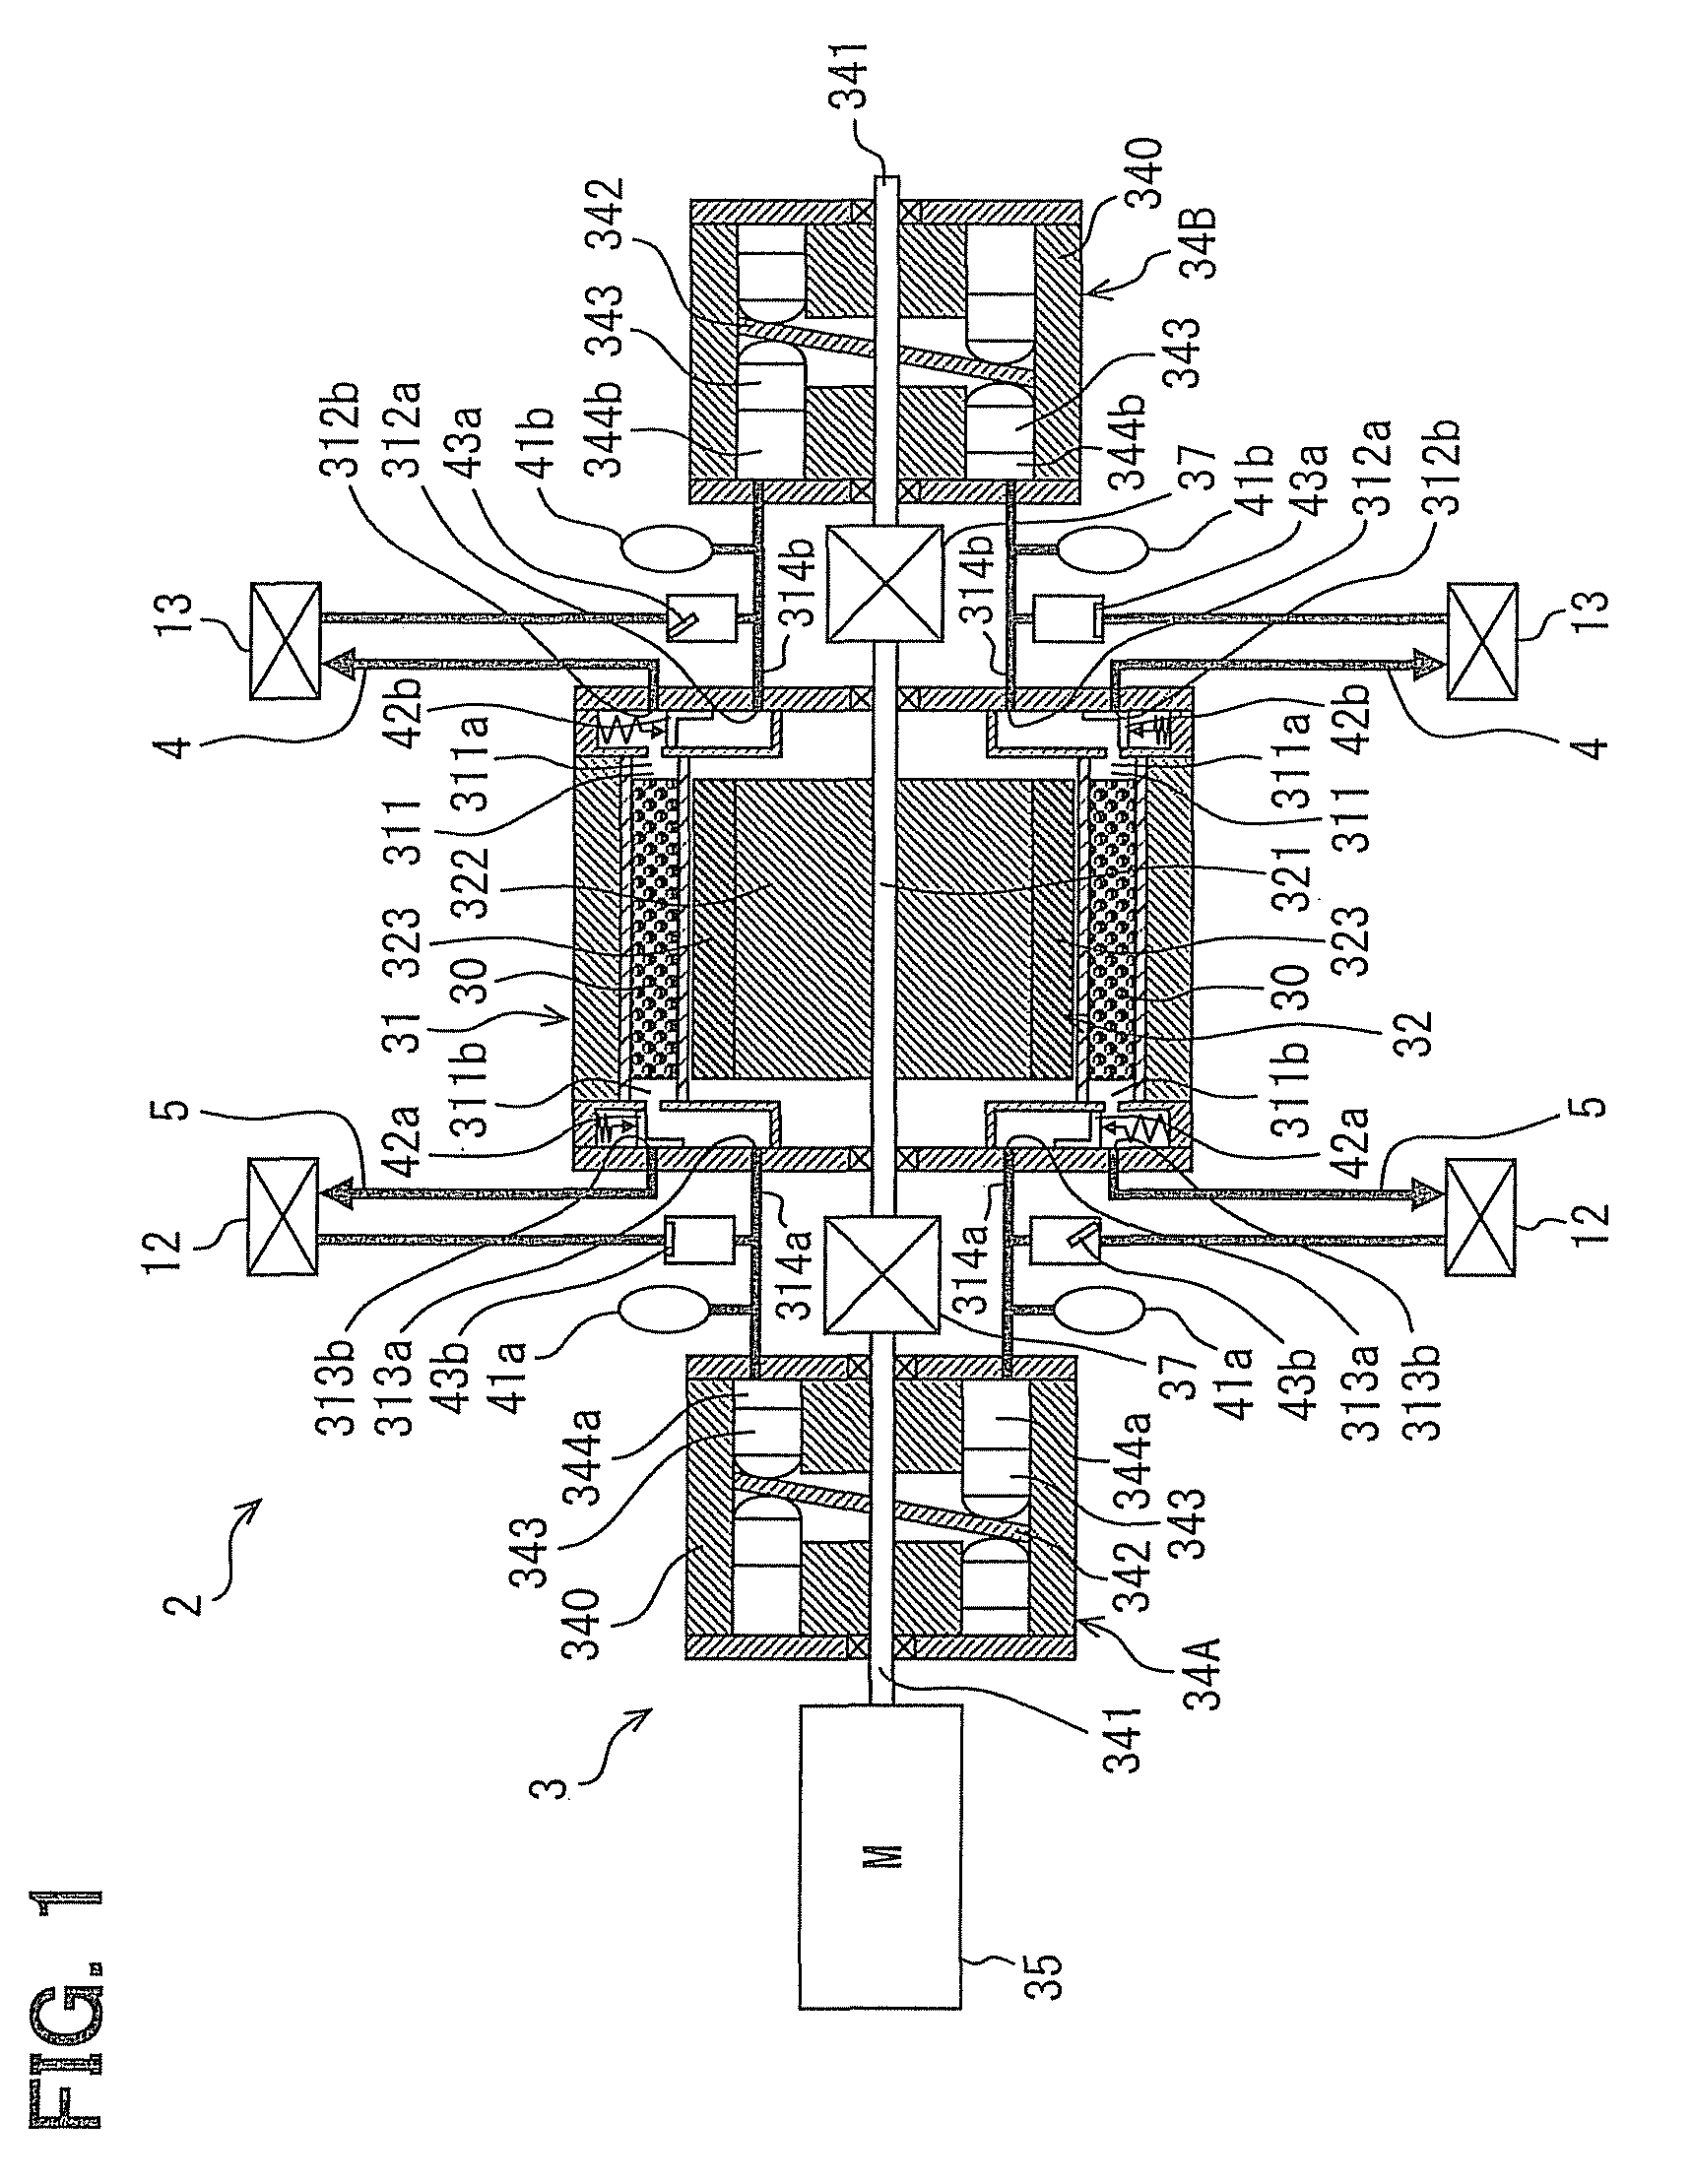 Reciprocating magnetic heat pump apparatus with multiple permanent magnets in different configurations